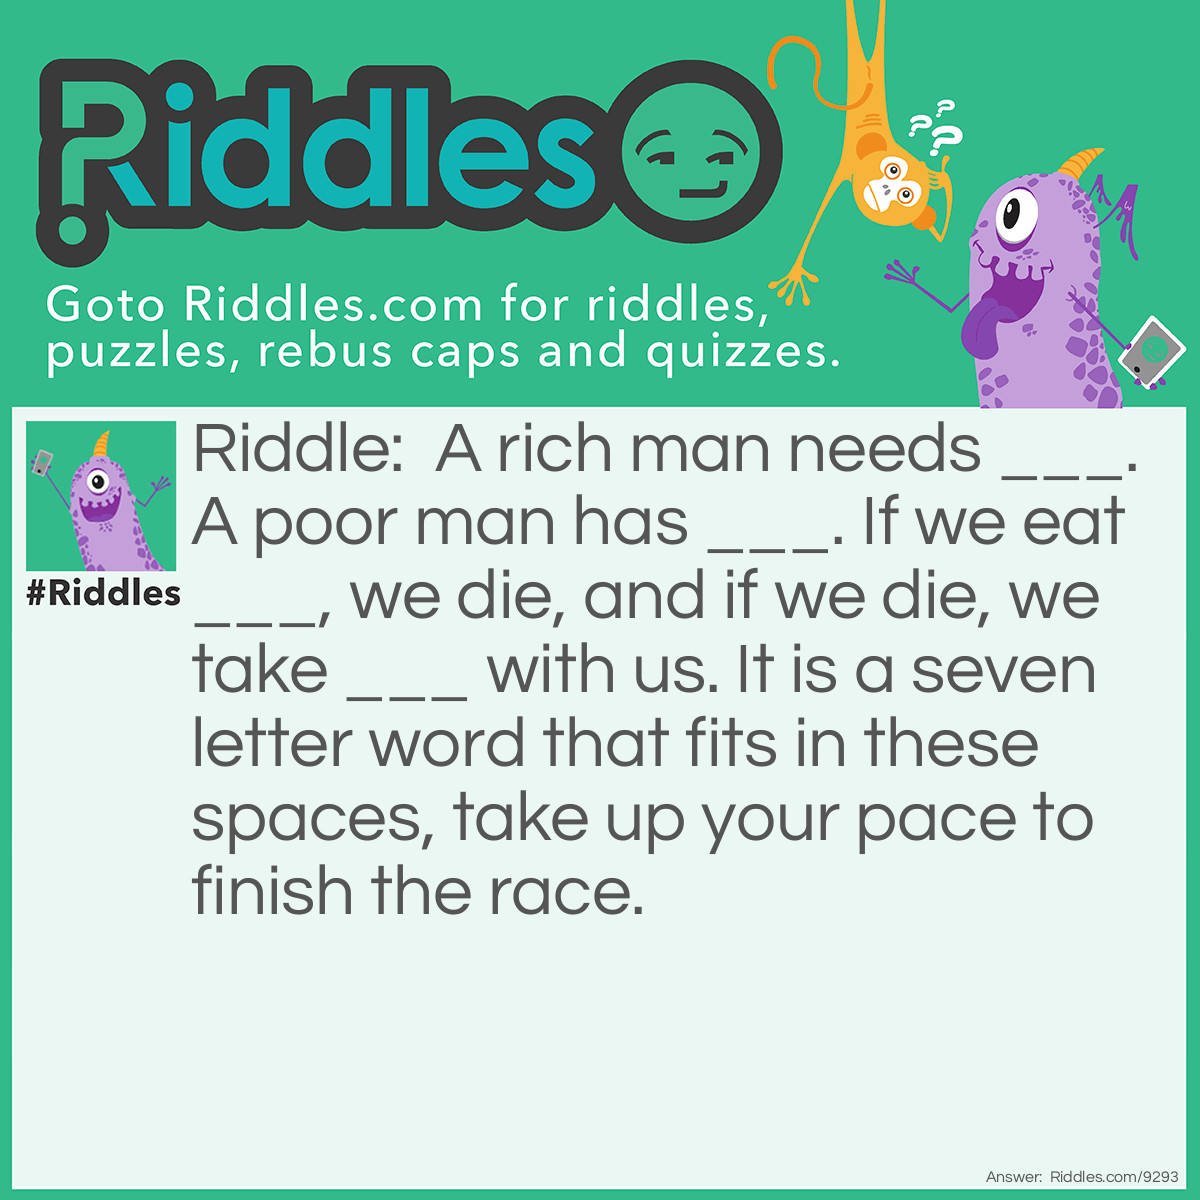 Riddle: A rich man needs ___. A poor man has ___. If we eat ___, we die, and if we die, we take ___ with us. It is a seven letter word that fits in these spaces, take up your pace to finish the race. Answer: Nothing "A rich man needs nothing. A poor man has nothing. If we eat nothing, we die, and if we die, we take nothing with us.